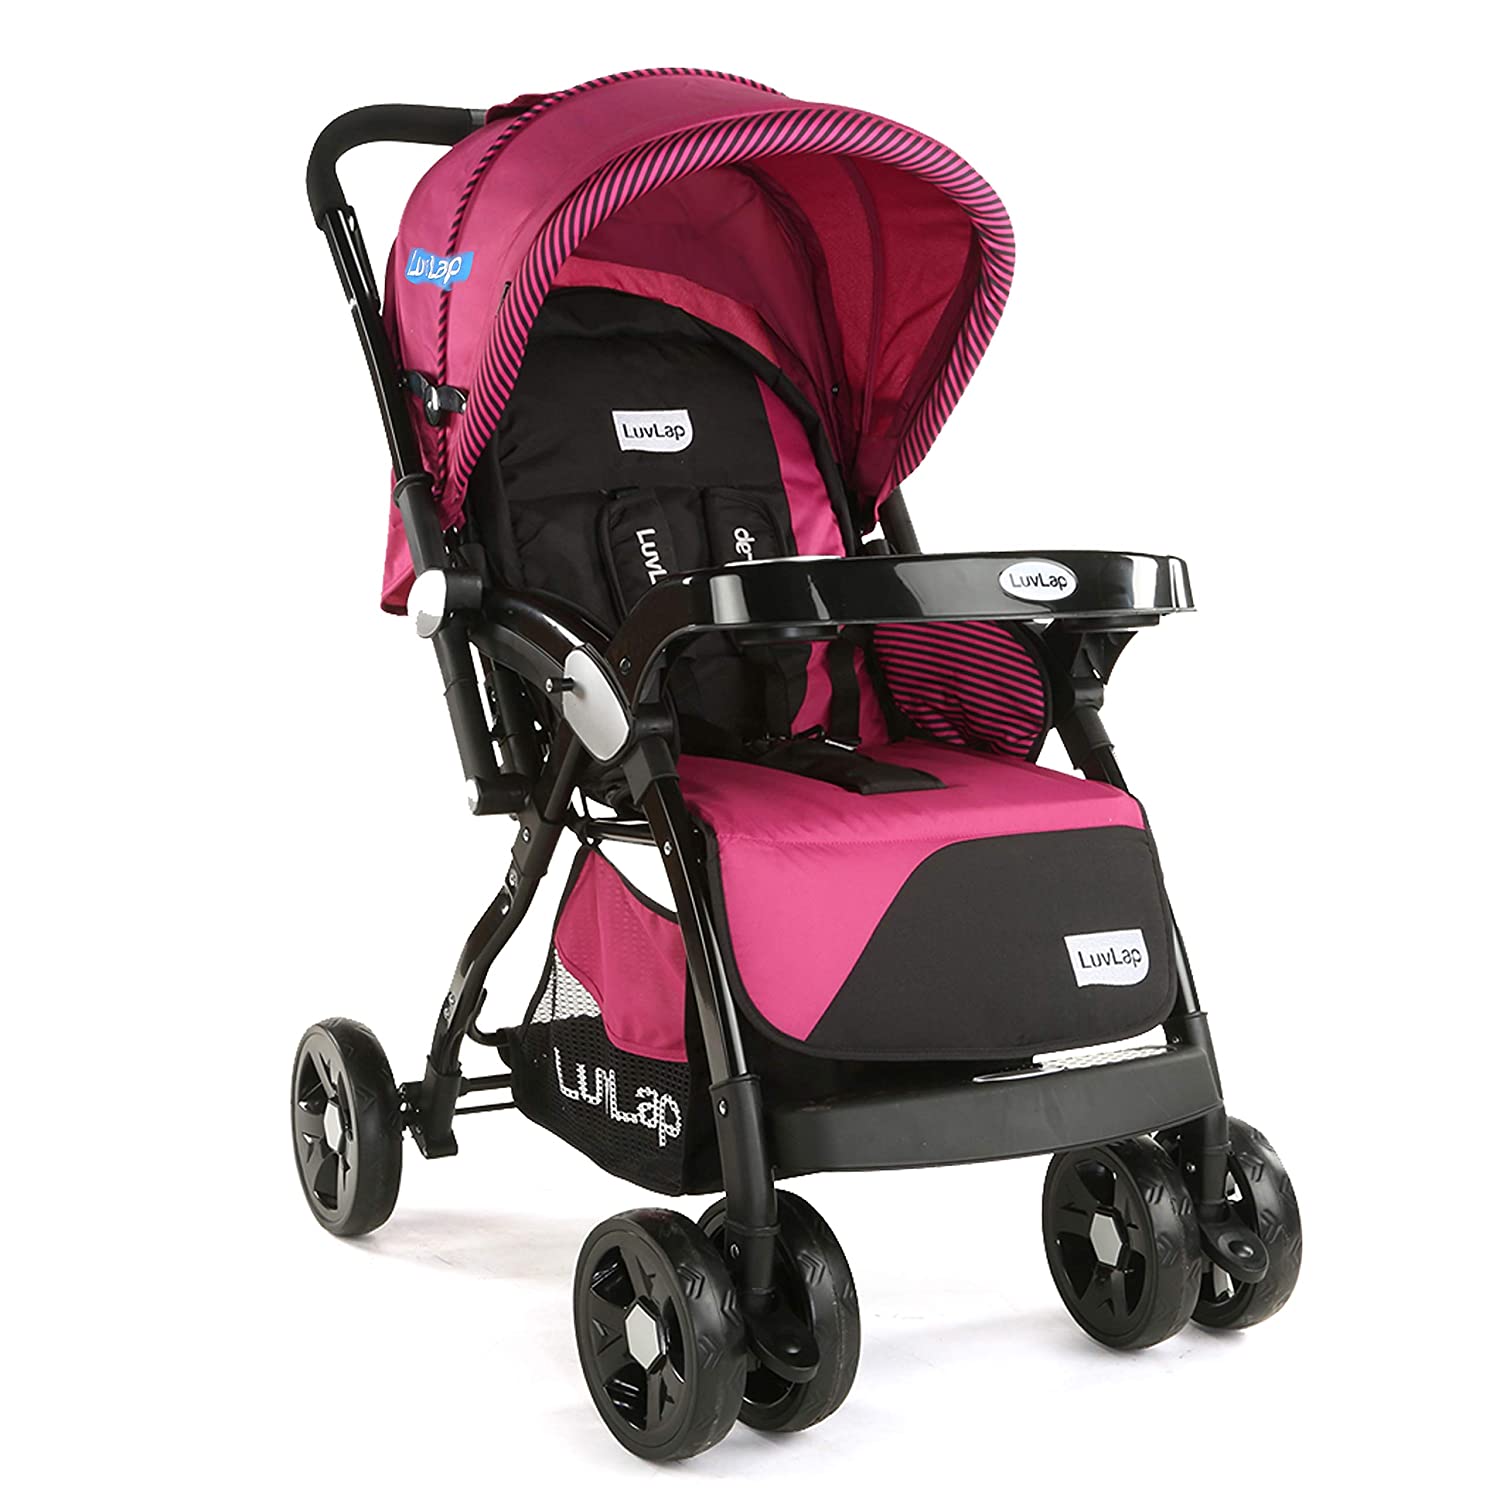 LuvLap Galaxy Stroller/Pram, Extra Large Seating Space, Easy Fold, for Newborn Baby/Kids, 0-3 Years (Pink)